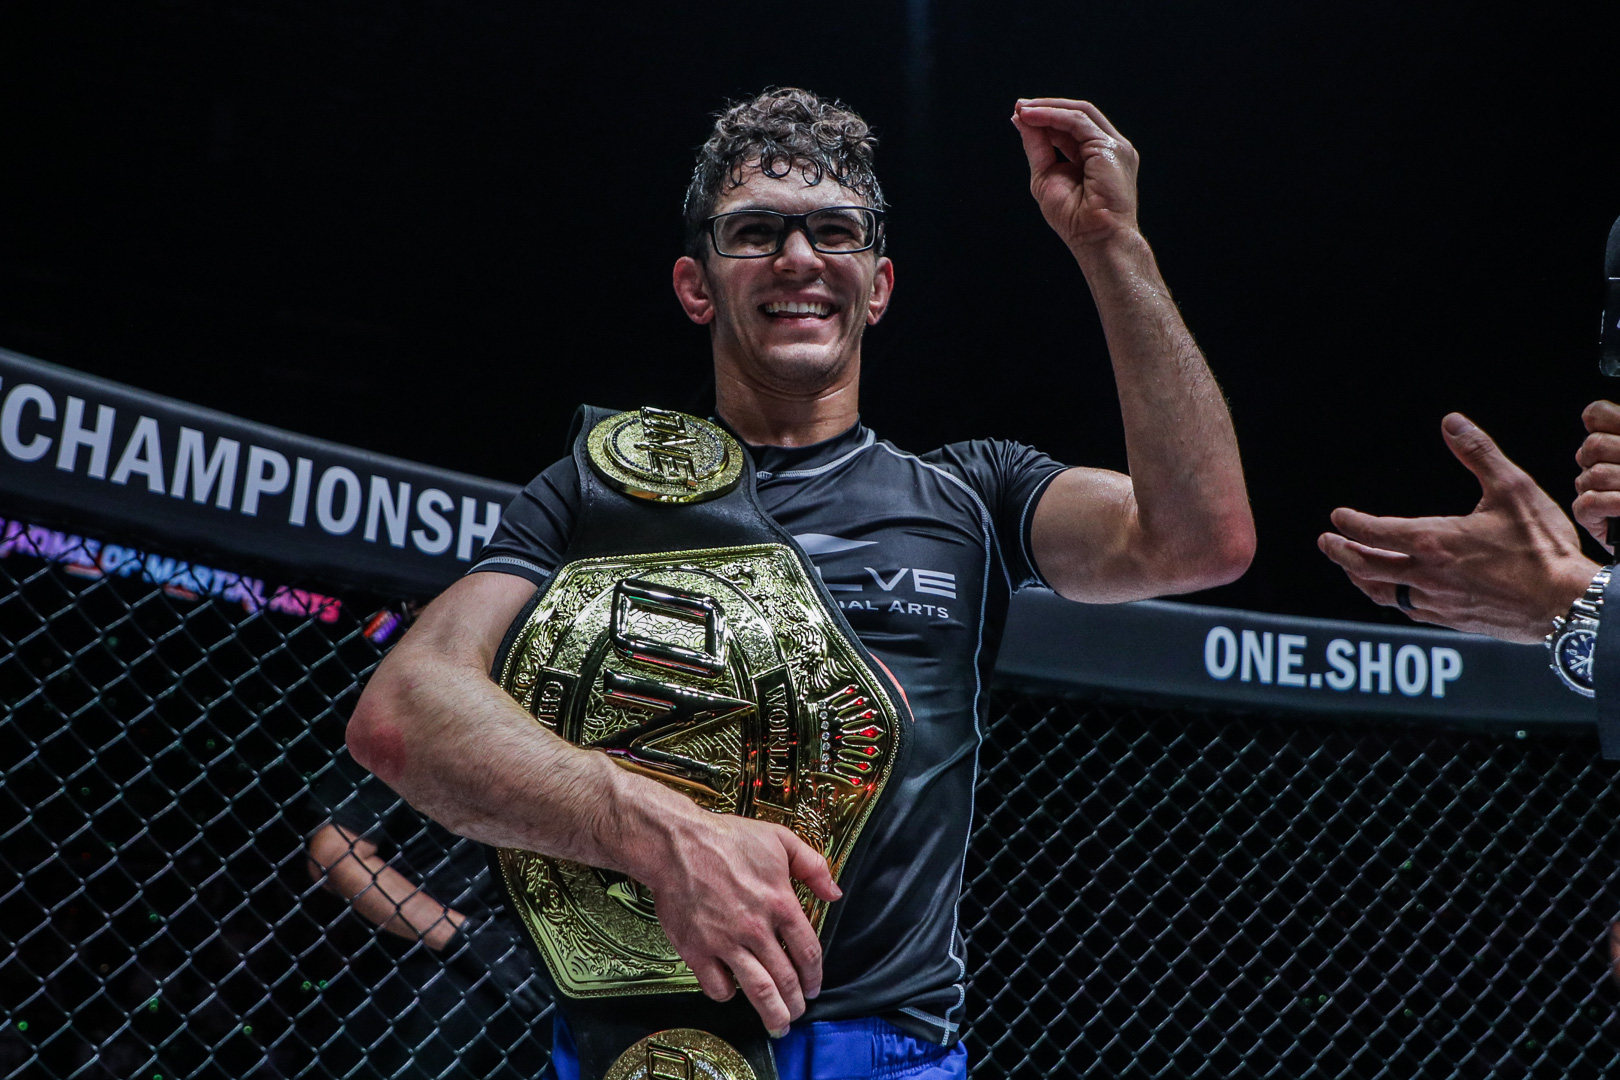 Mikey Musumeci celebrates after winning the ONE flyweight submission grappling title with a decision defeat of Cleber Sousa.